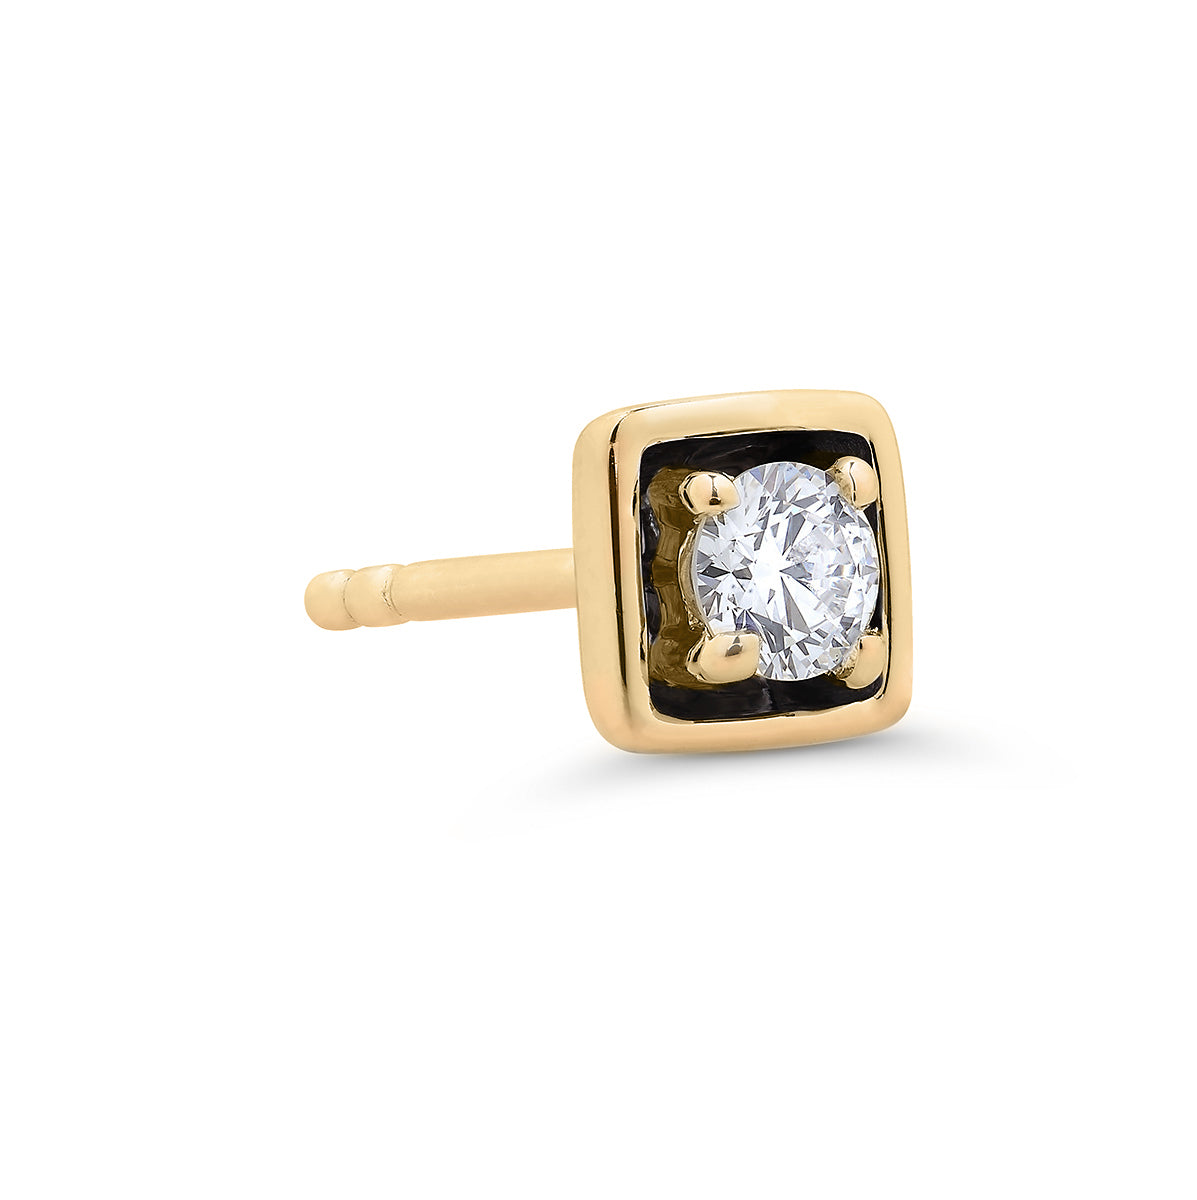 Edgy Studs in 14K Gold